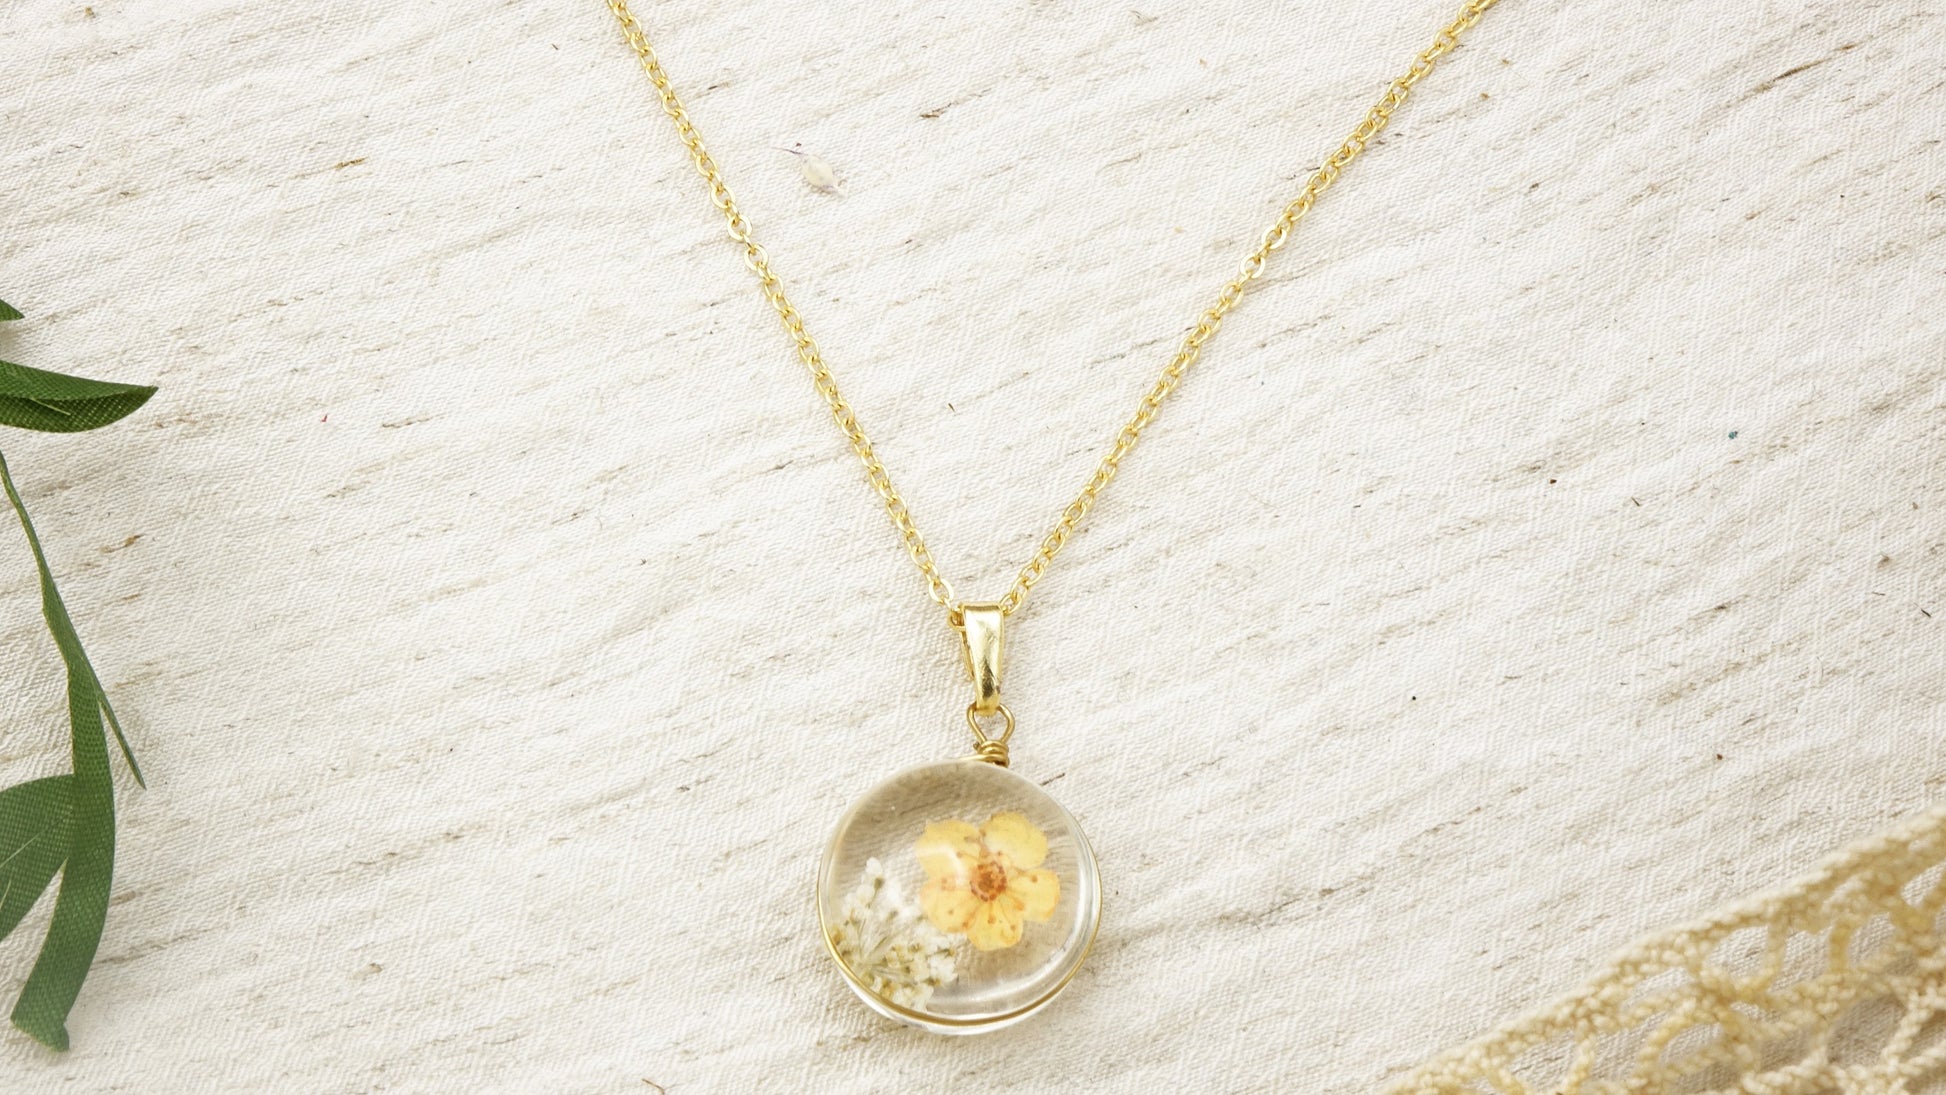 Buttercup Real Flower Necklace - Verna Artisan Works